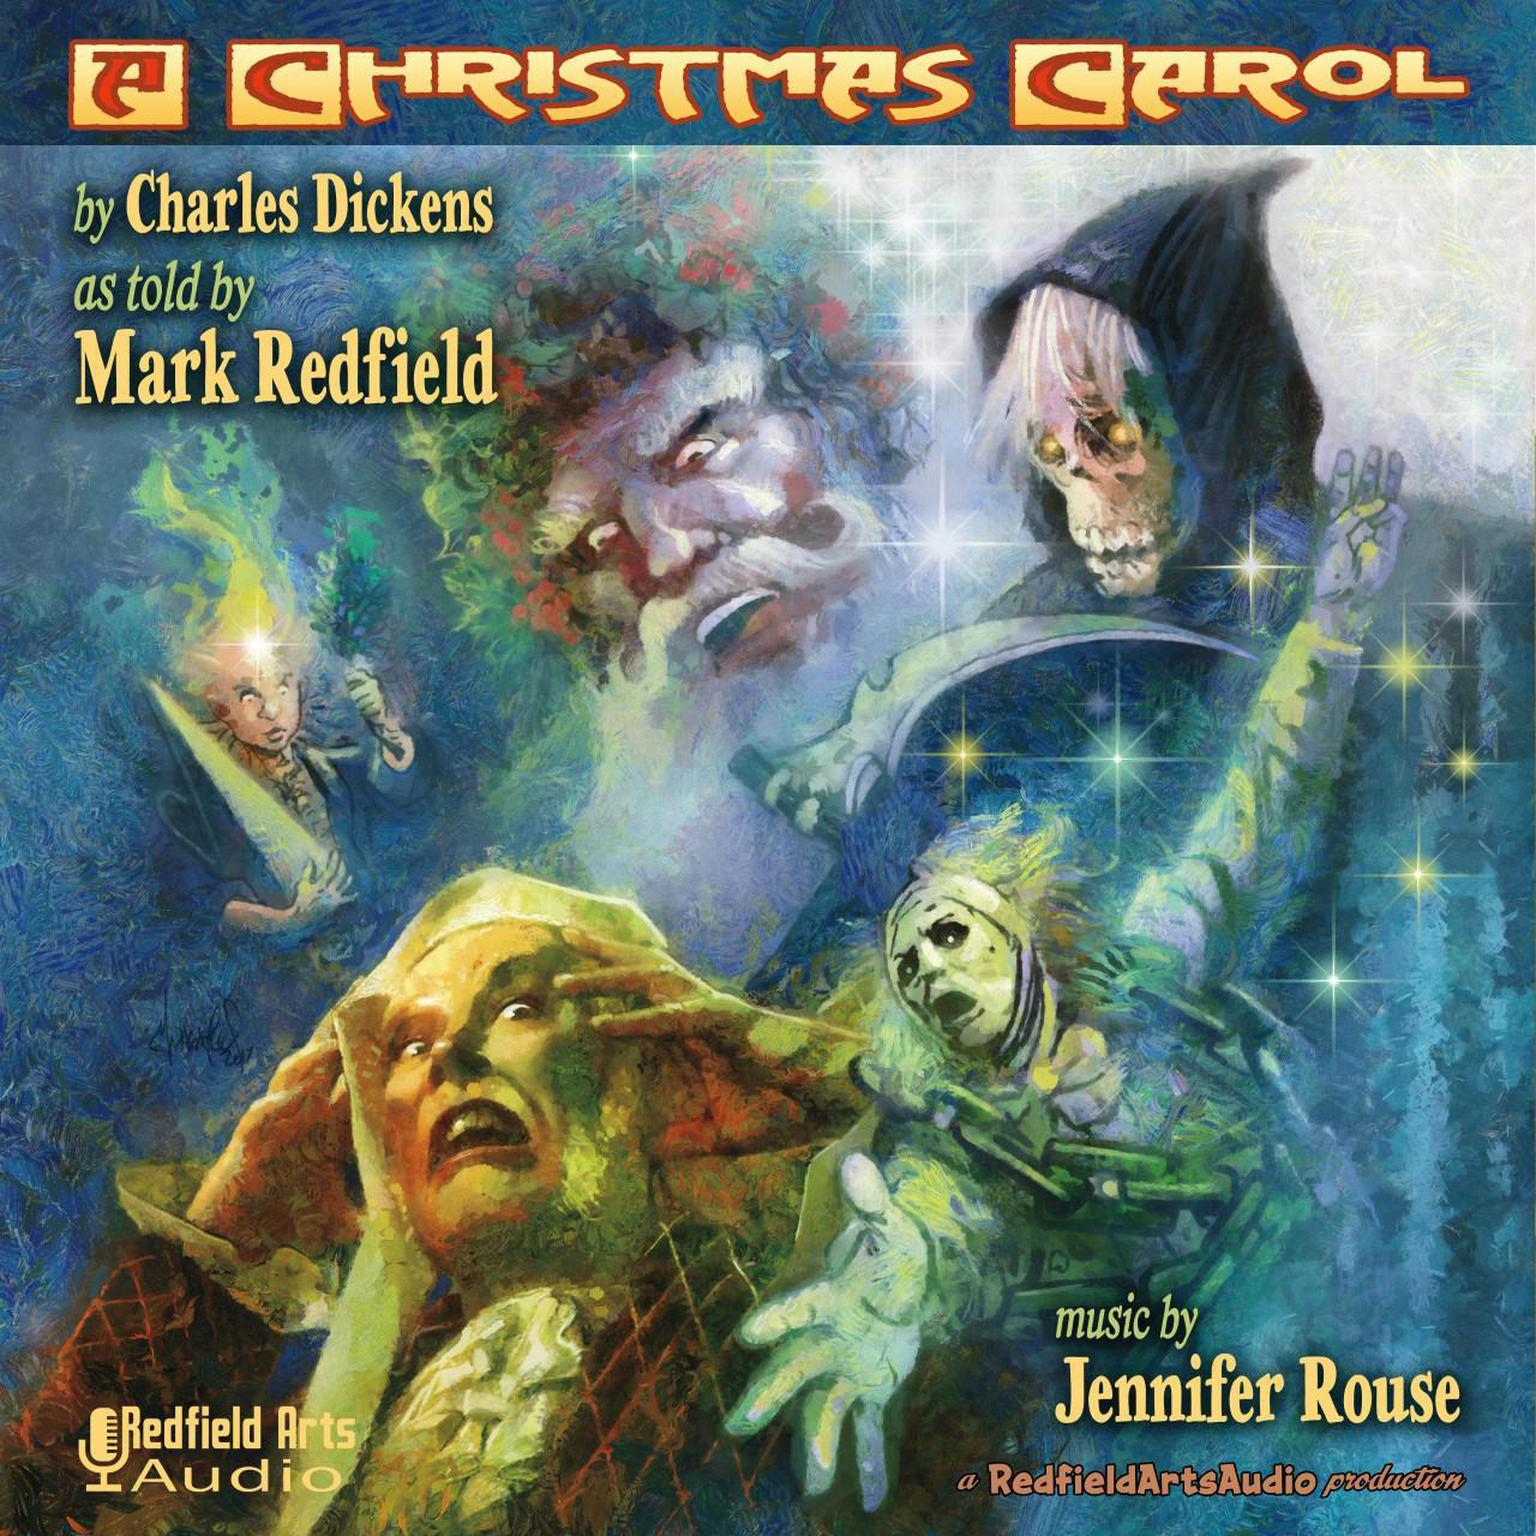 Charles Dickens A Christmas Carol, as Told by Mark Redfield (Abridged) Audiobook, by Charles Dickens